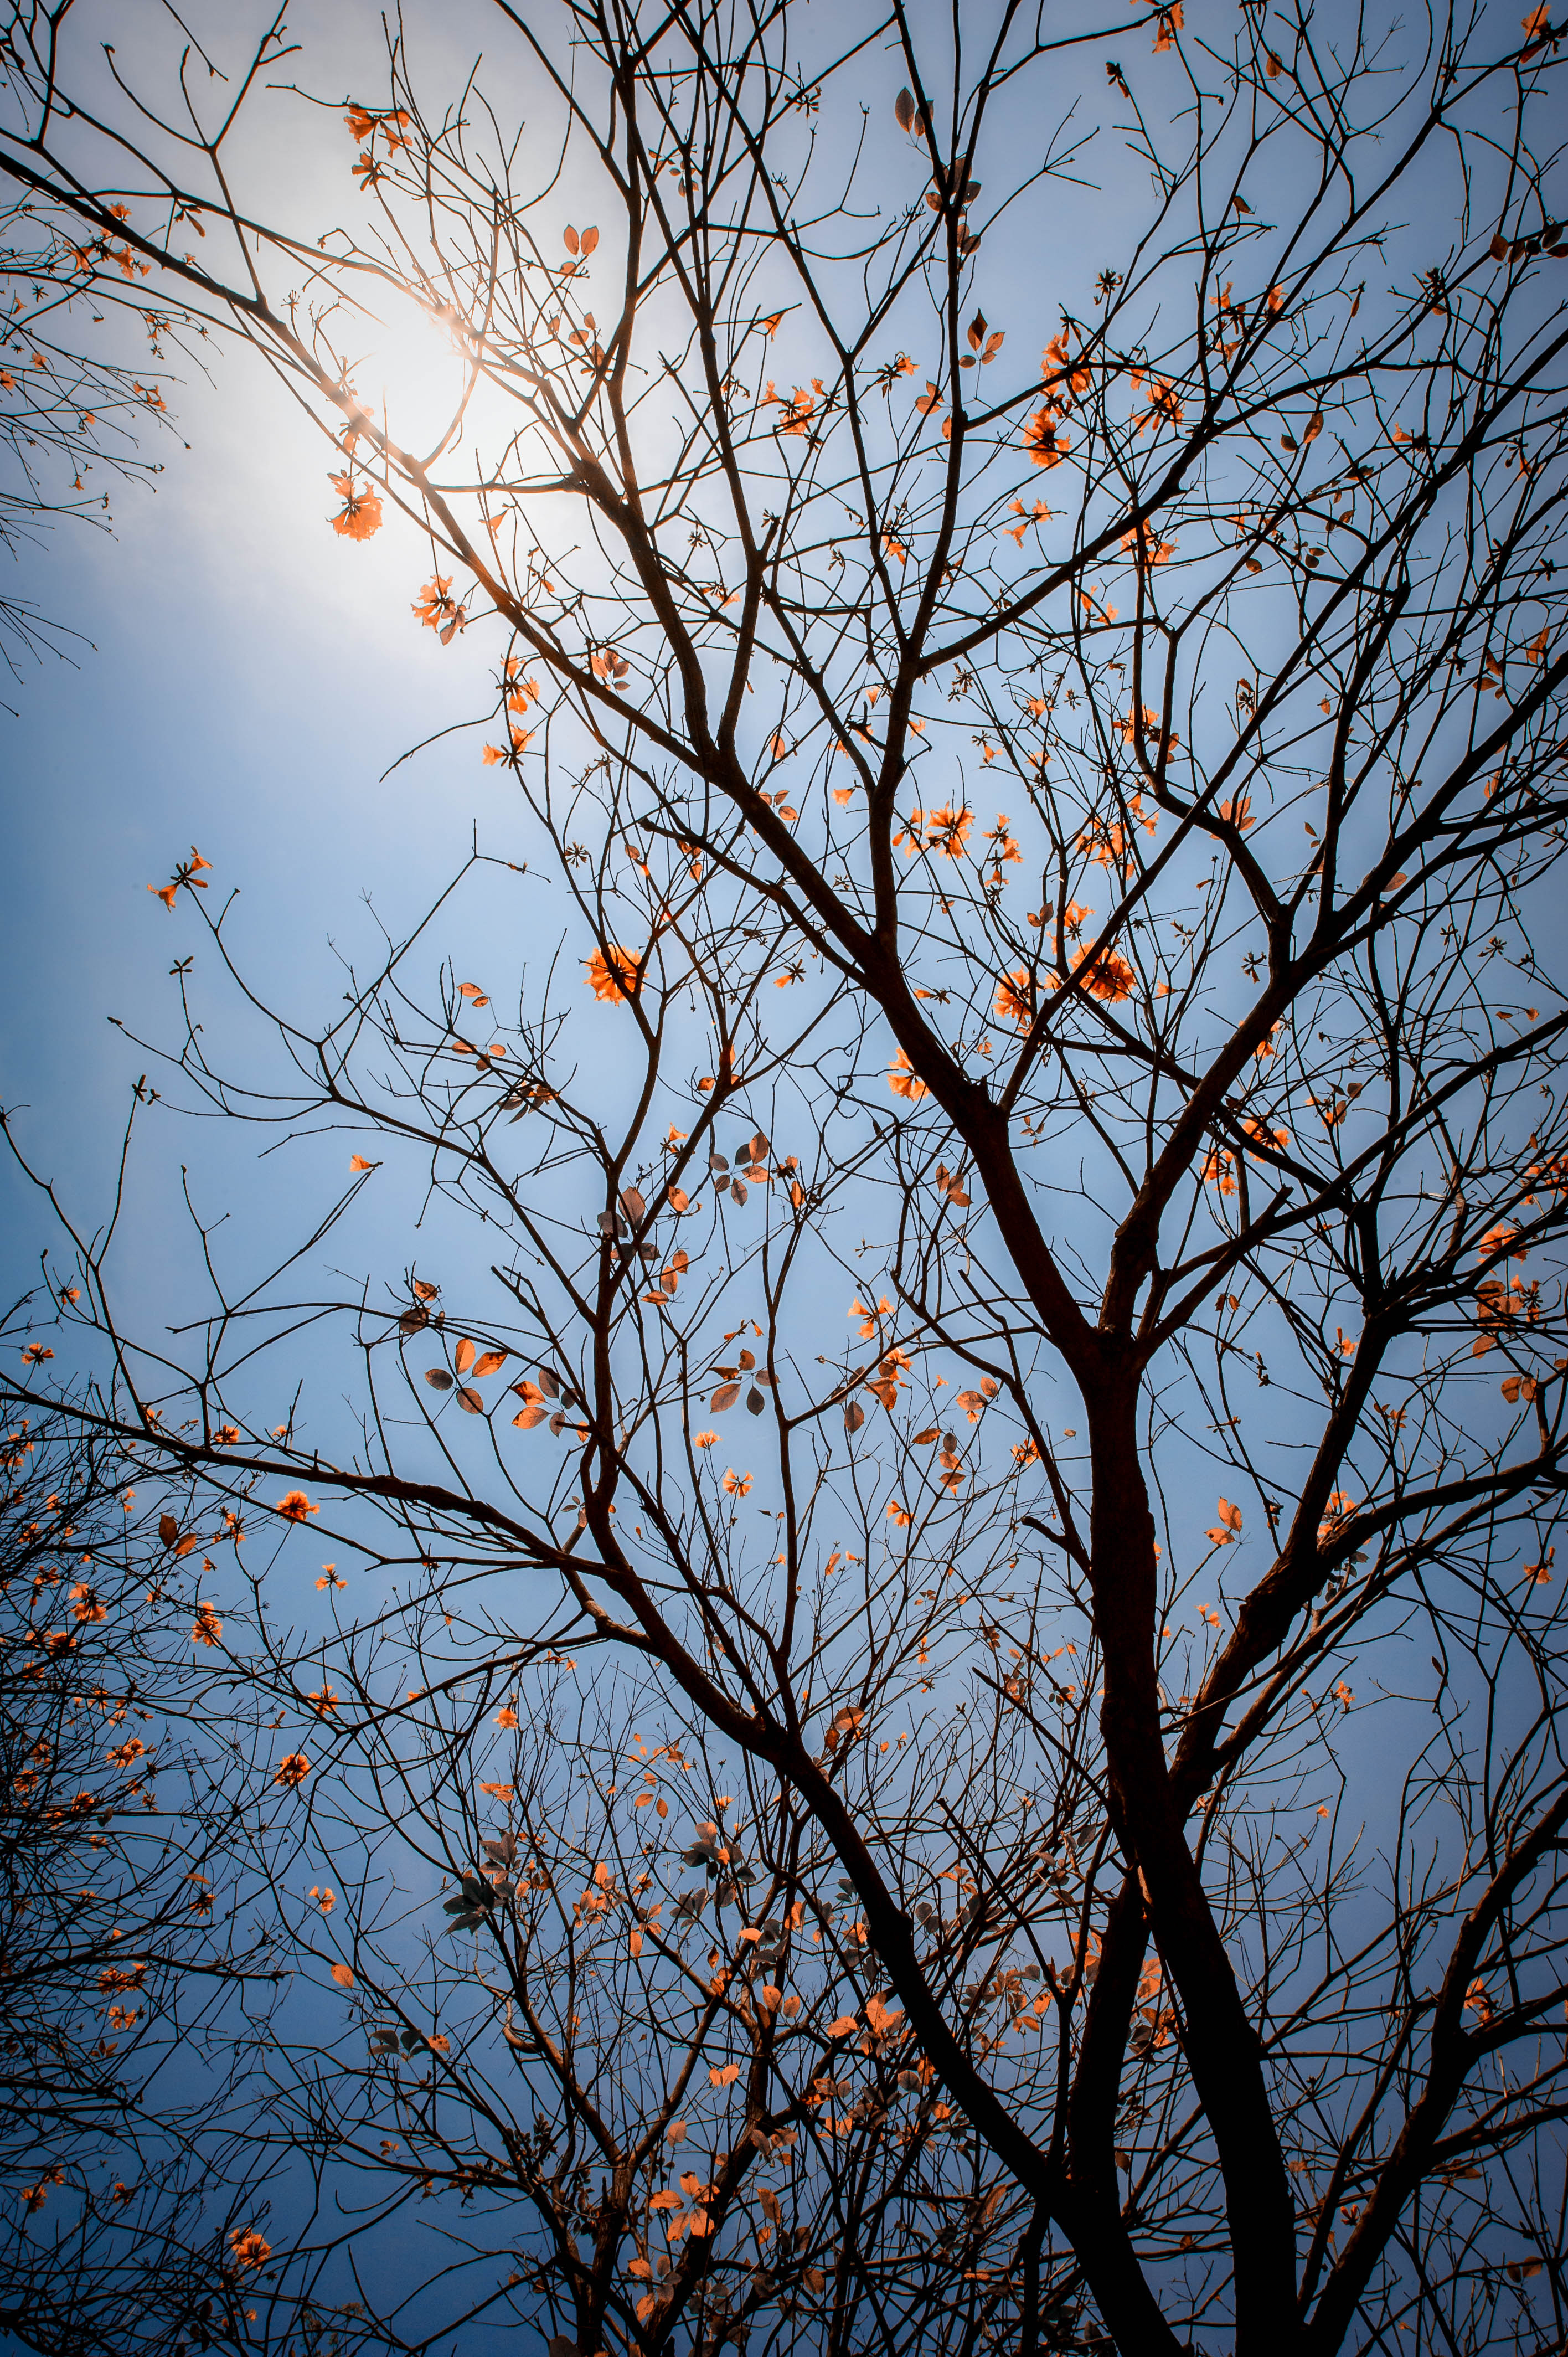 sky, leaves, nature, flowers, wood, tree, branches